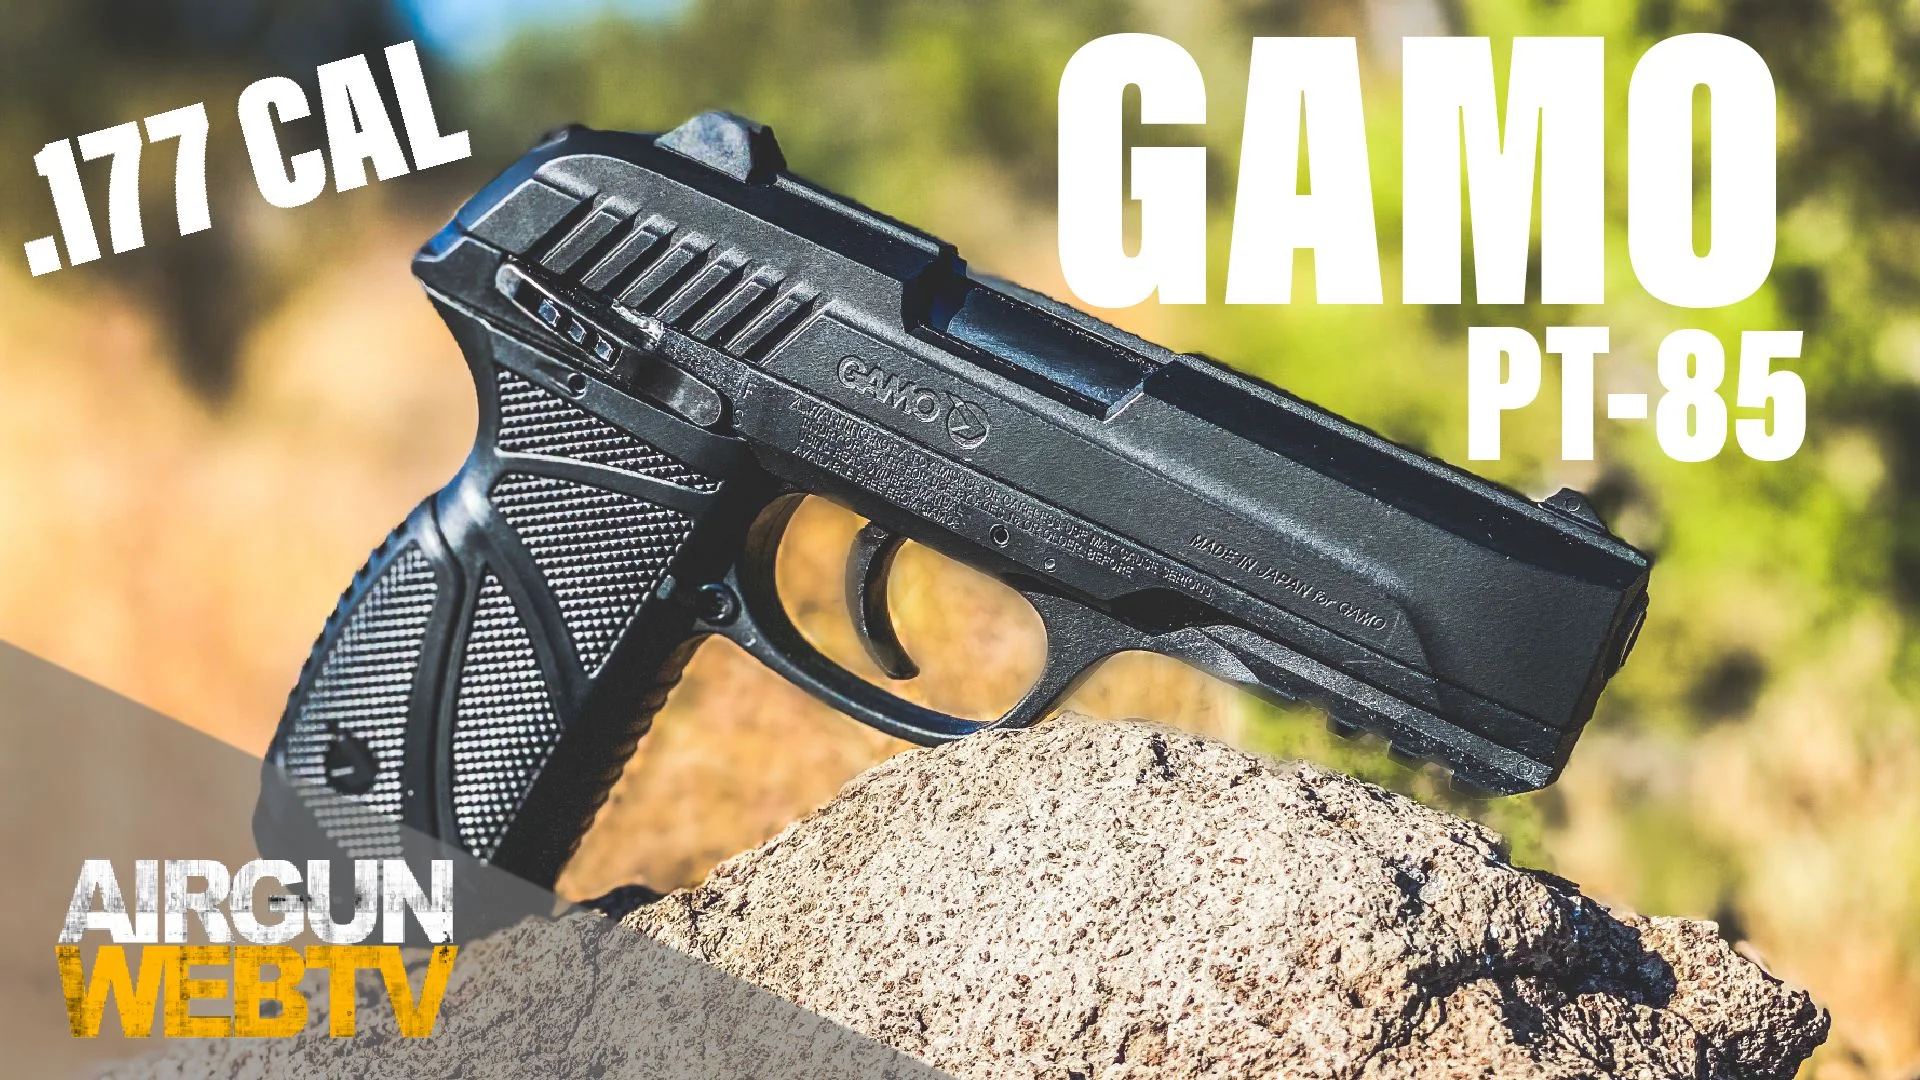 Gamo P-25 and PT-85 CO2 Pellet Pistol Table Top and Shooting Review on Vimeo